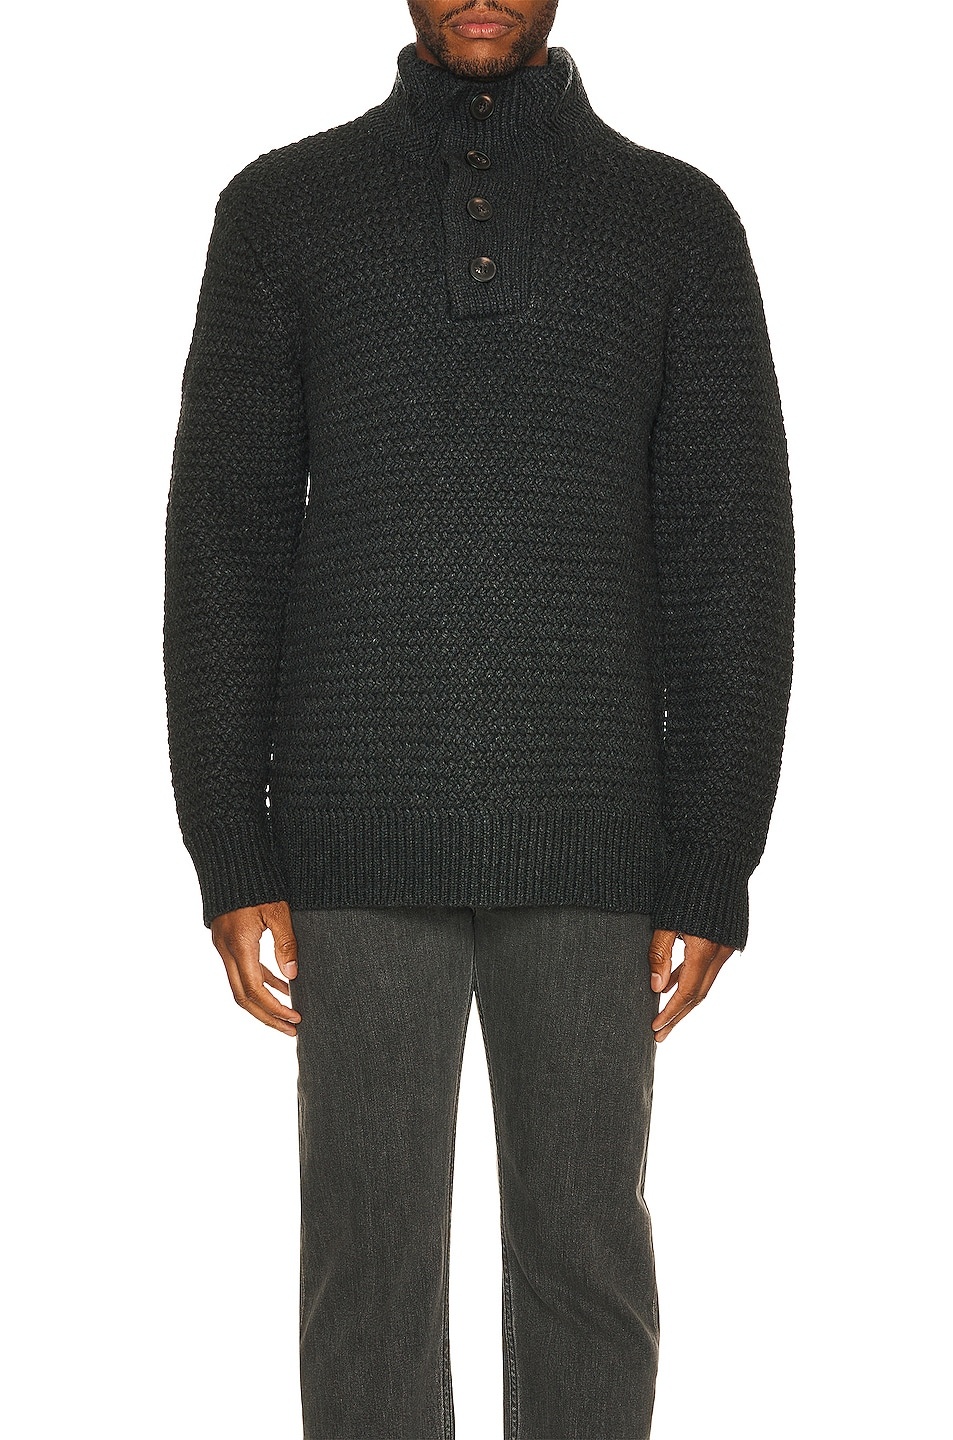 Mens Funnel Neck Military Sweater - 3